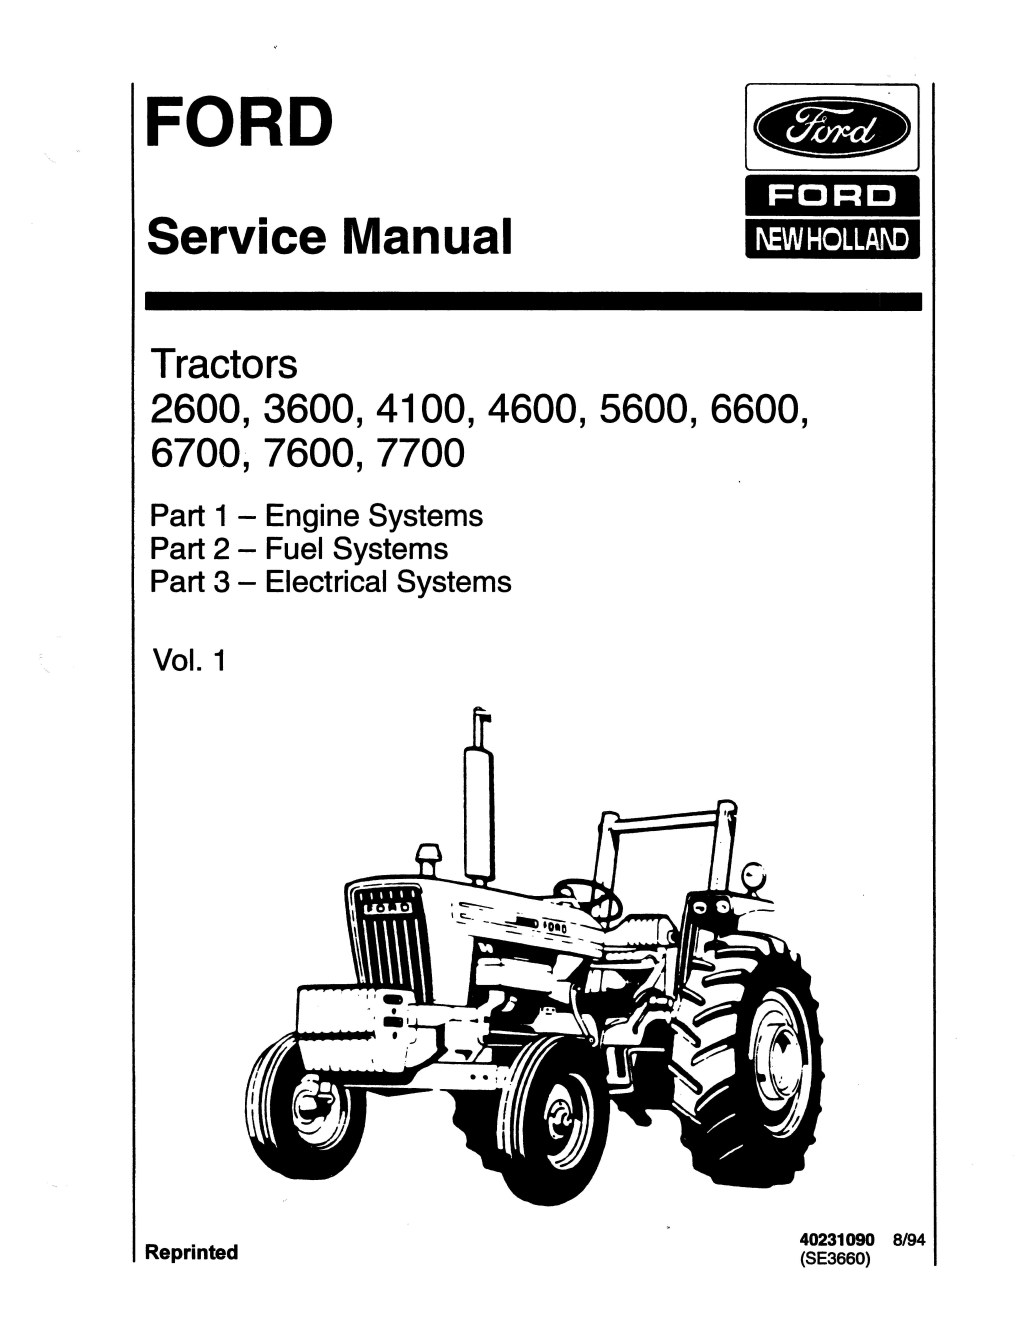 Picture of: Ford  Tractor Service Repair Manual by ieodkdksmmnv – Issuu